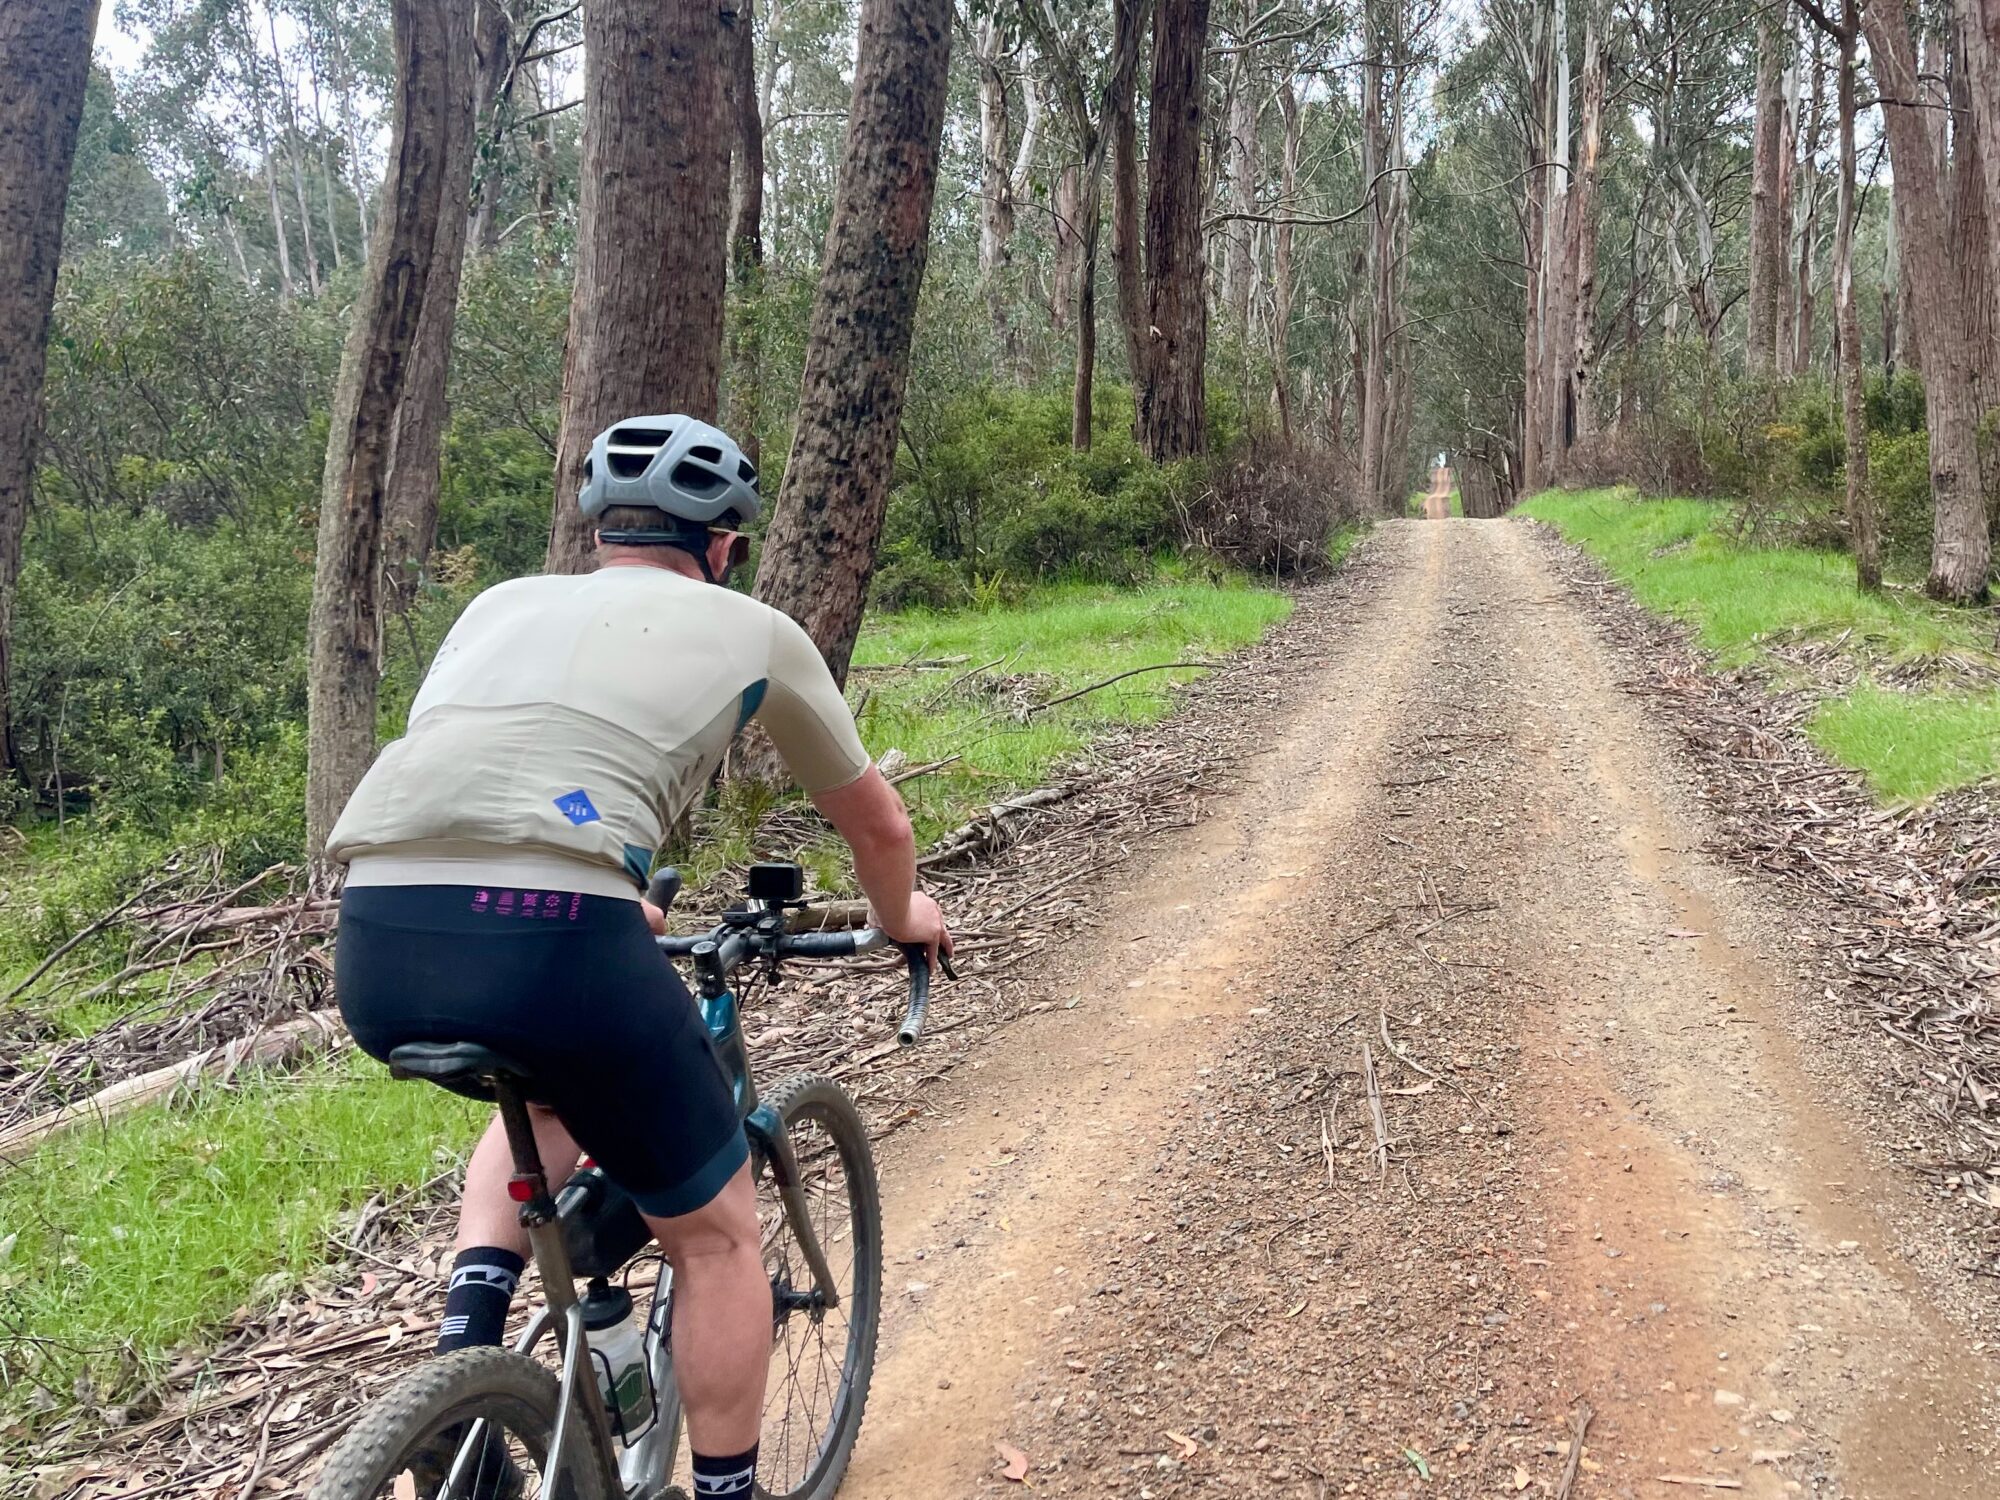 Cyclist riding on rolling gravel roads through native forest